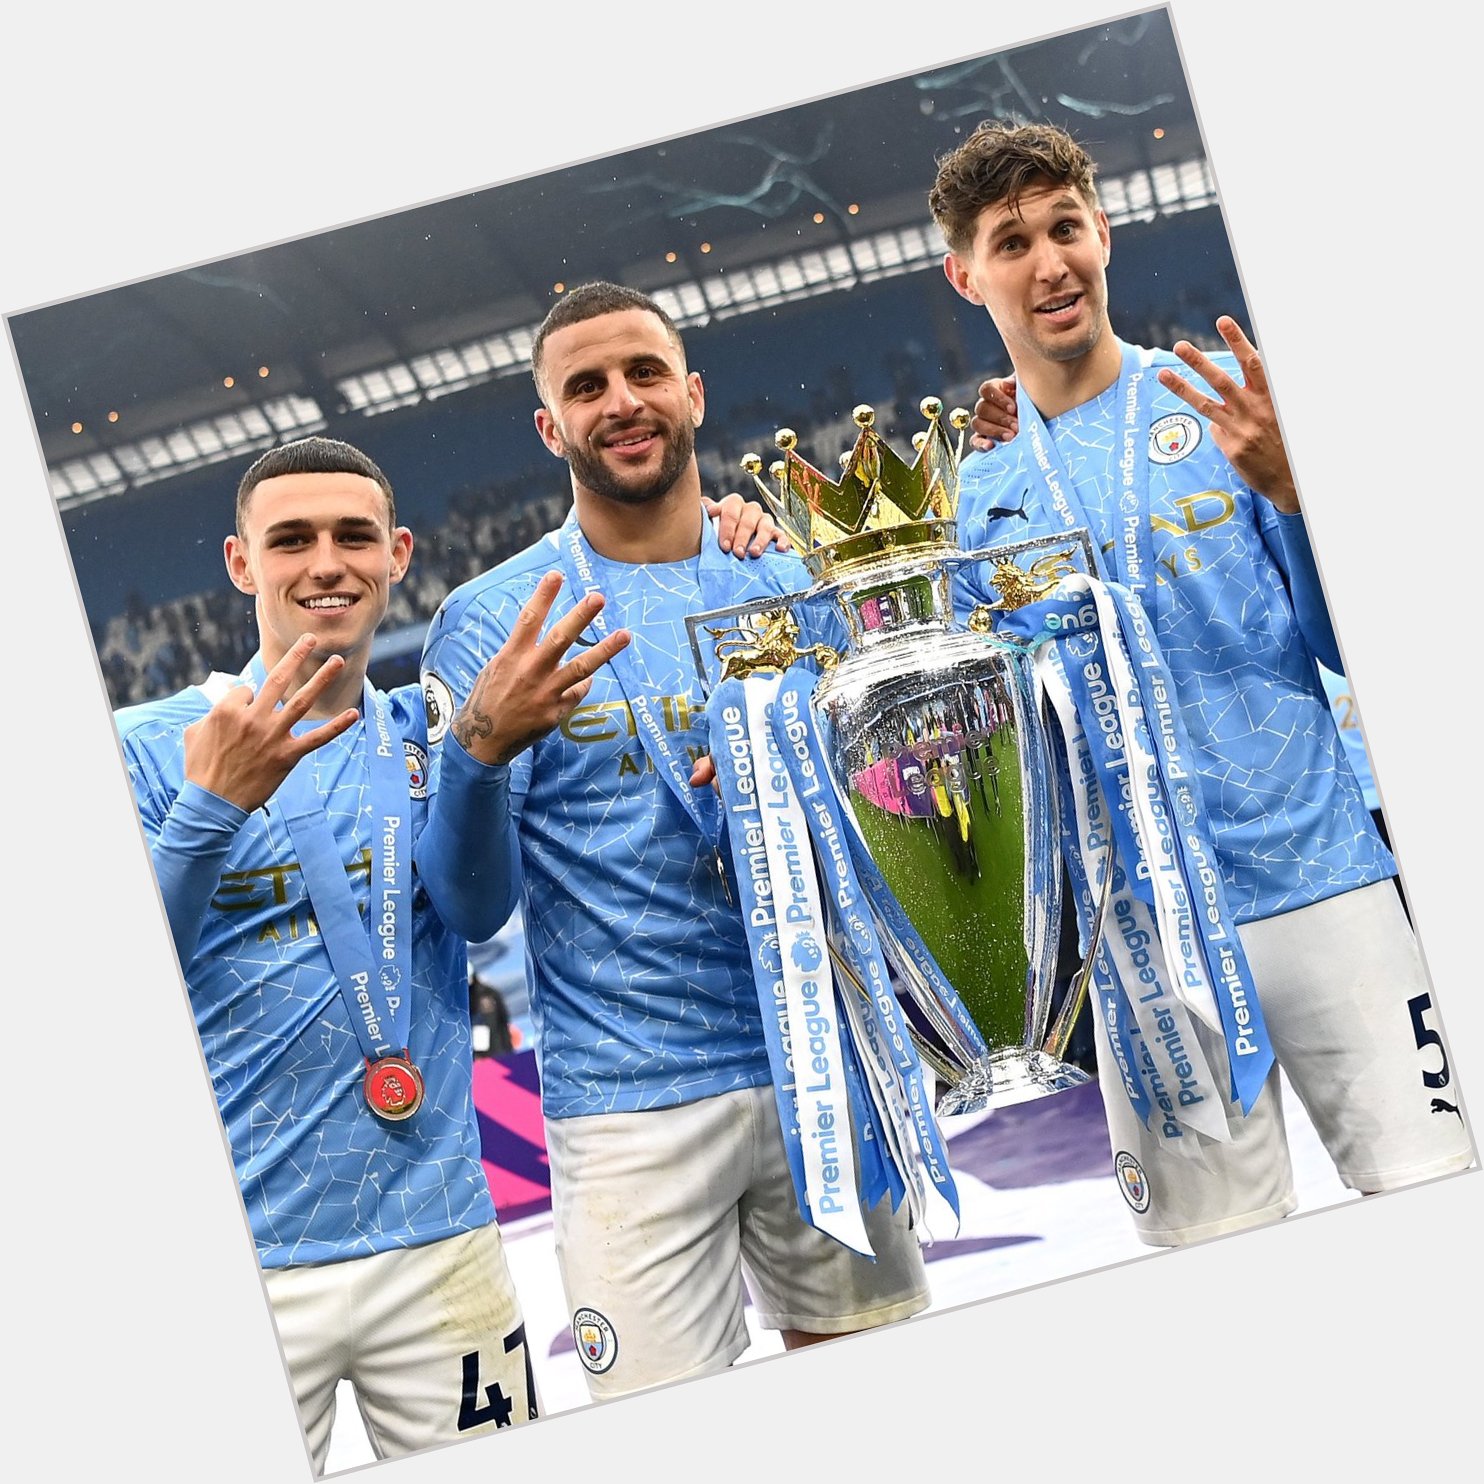 Happy Birthday to Phil Foden, Kyle Walker and John Stones who all share their birthday today!  